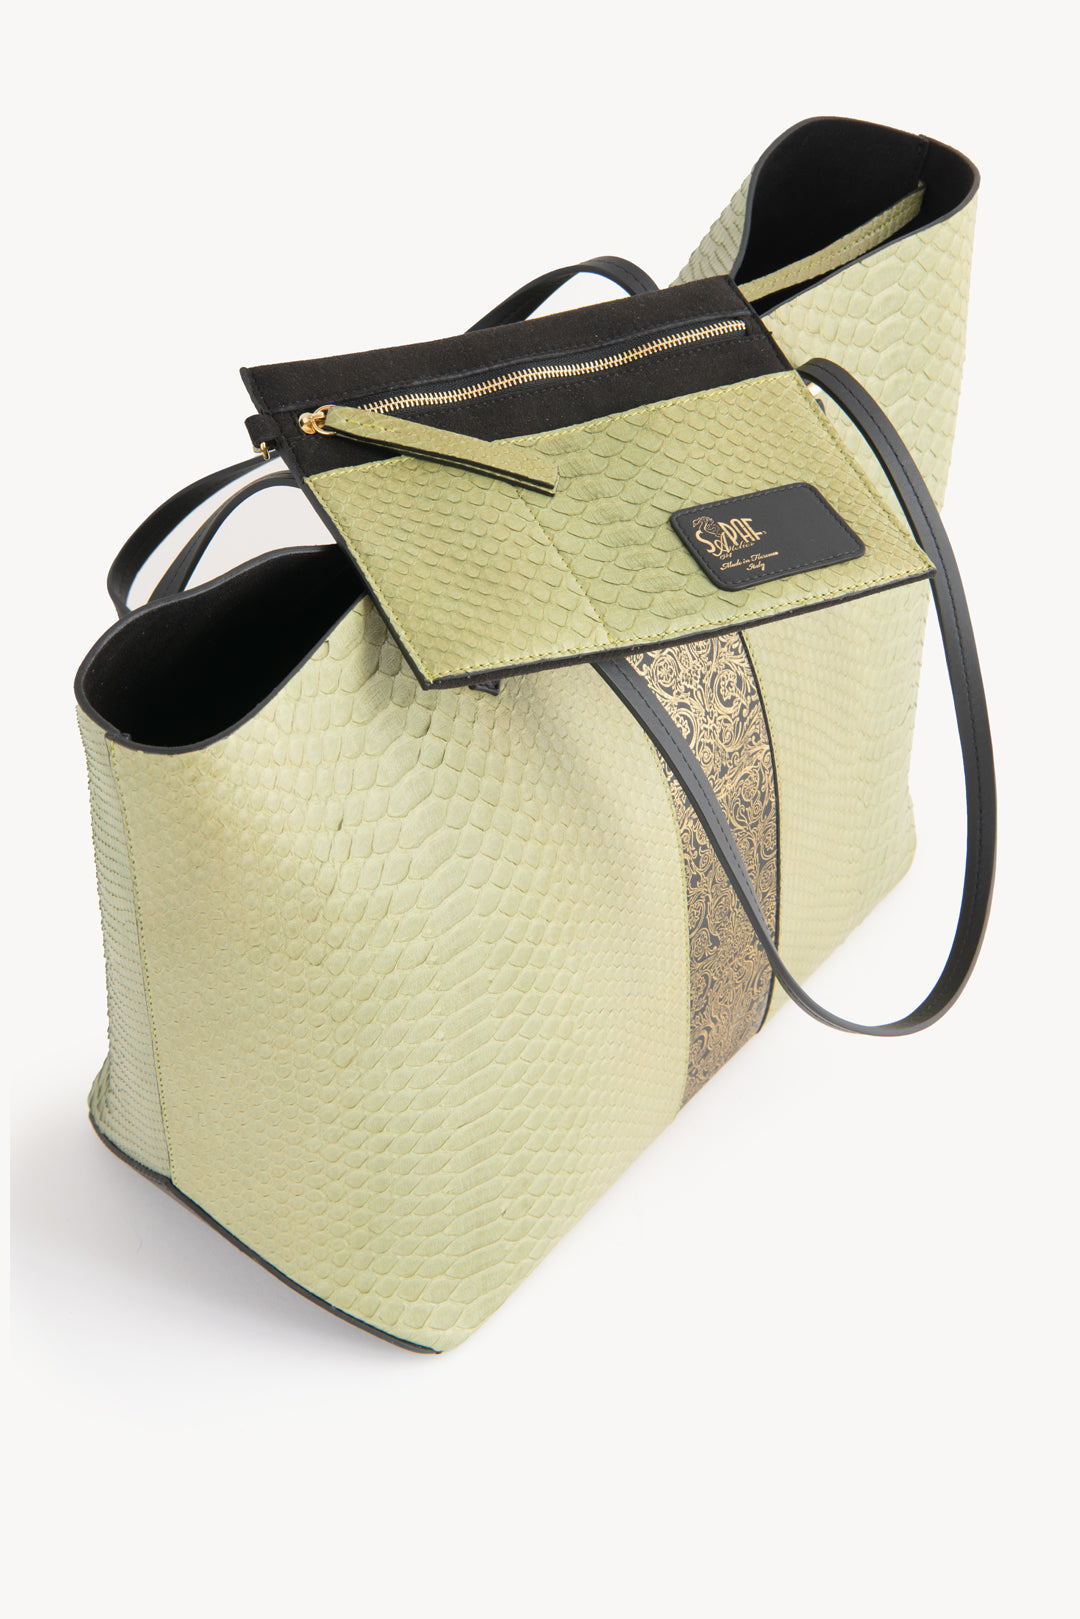 Shopping Bag big size exotic leather - Green and Black